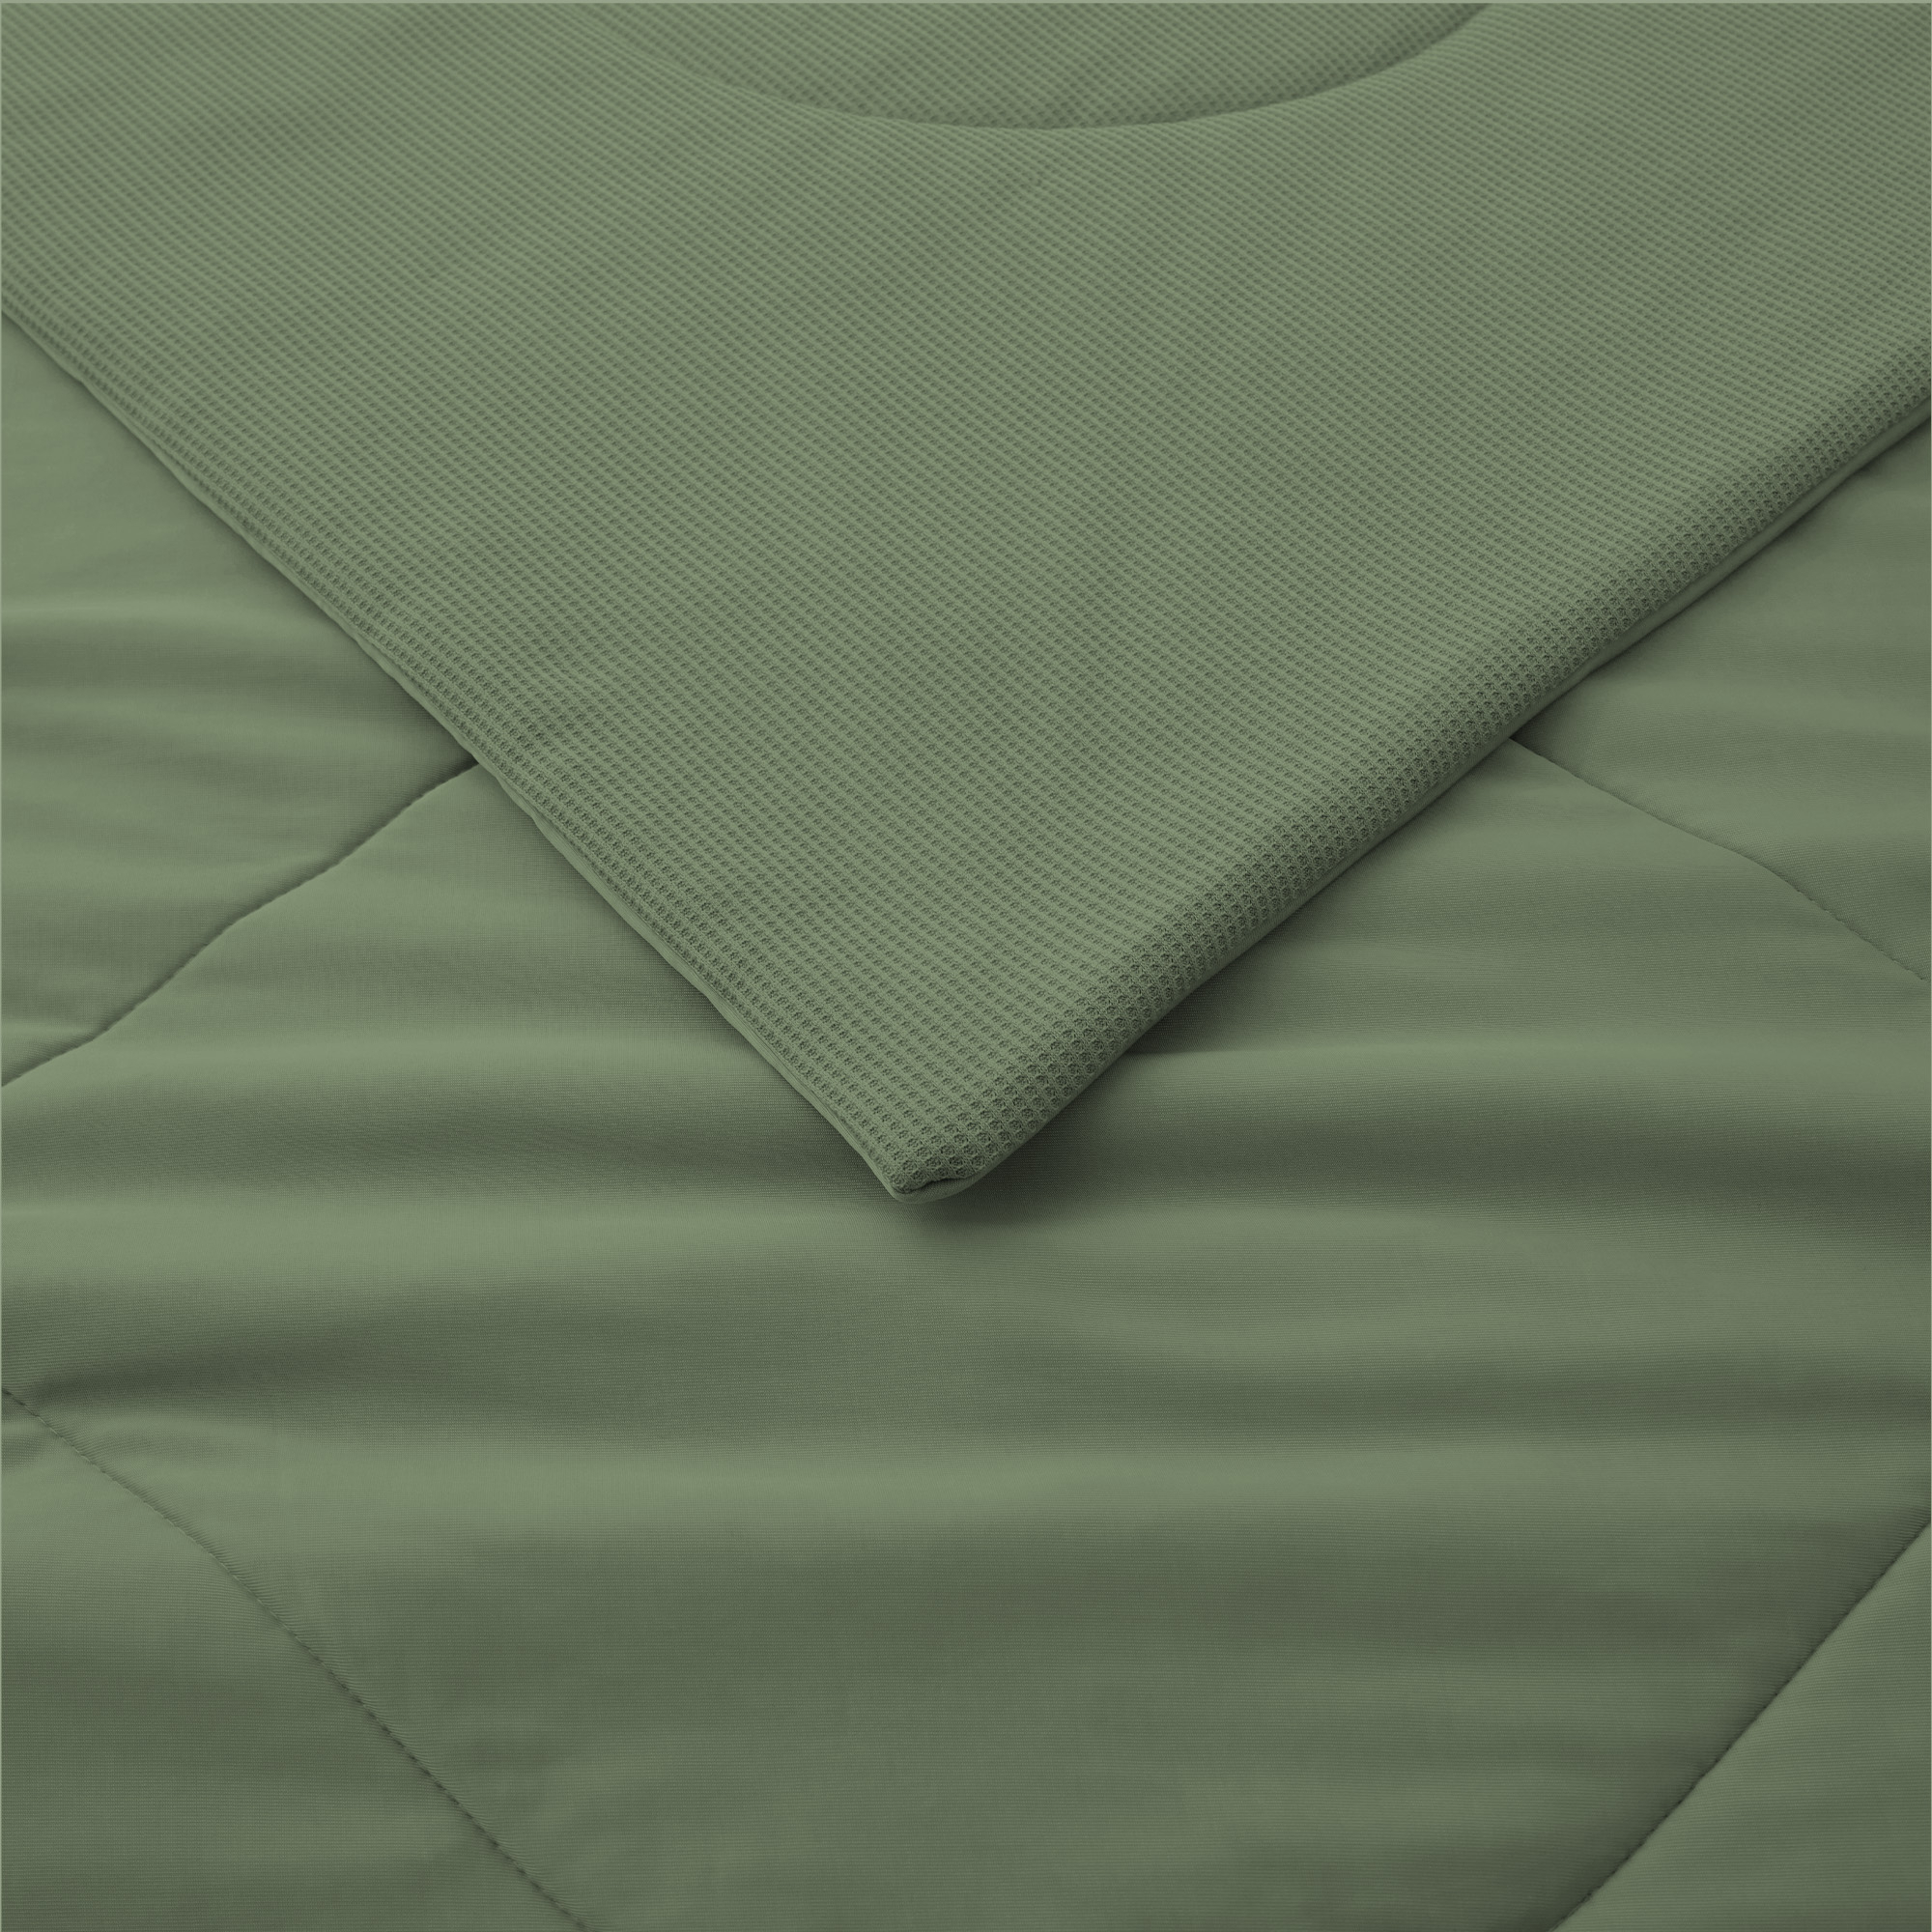 Silky Lightweight Blanket With Waffle Design Oversize Bed Blanket, Green, 68 X 90